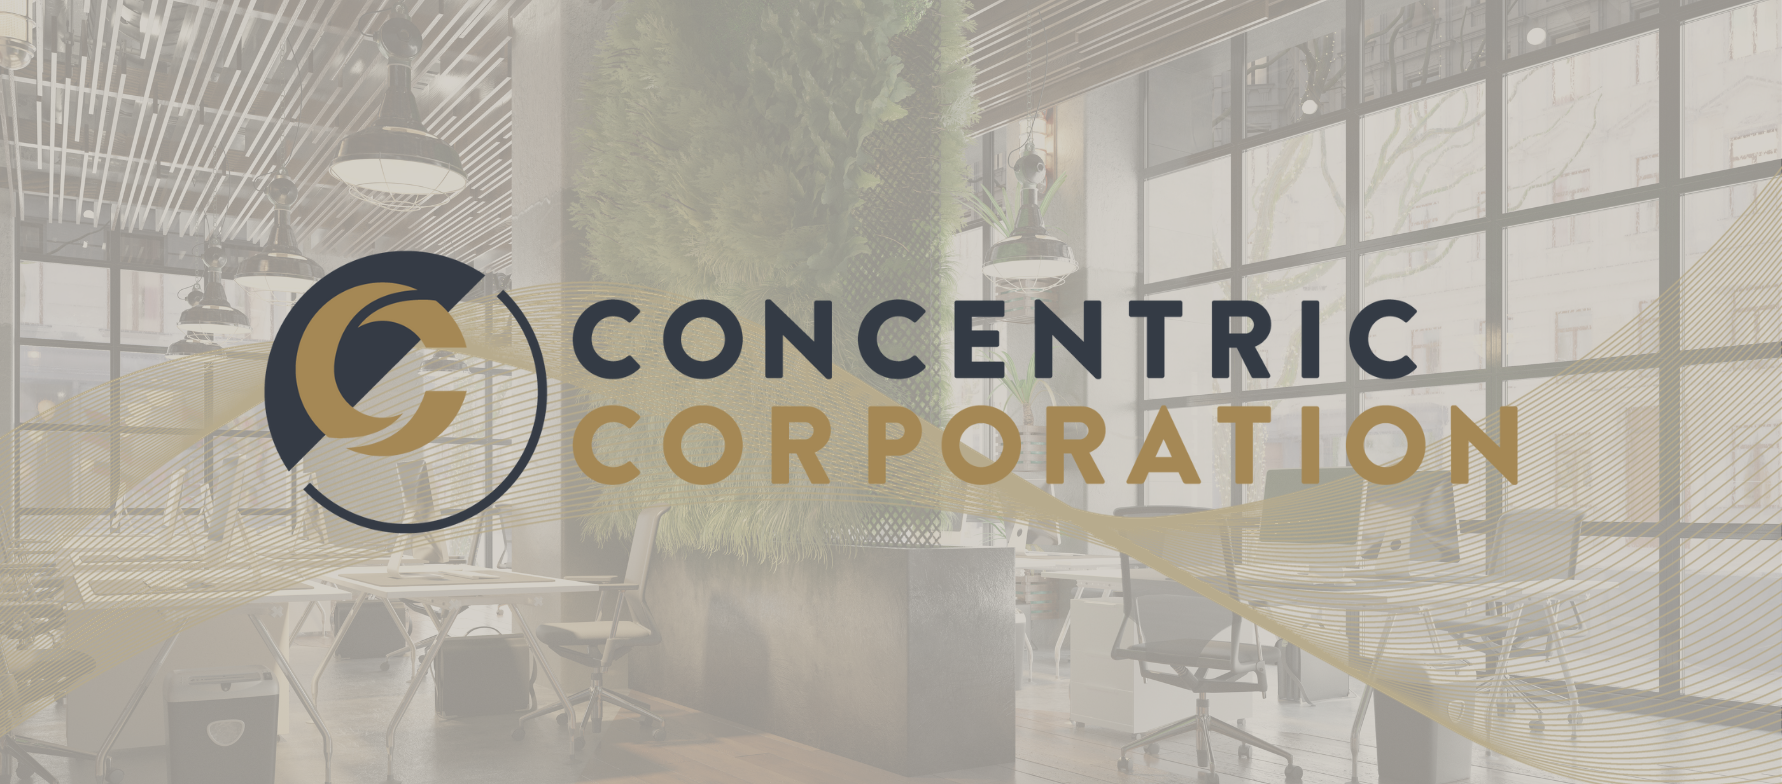 Concentric Corporation Expands its Reach in Executive Search with Acquisition of Clarity Search